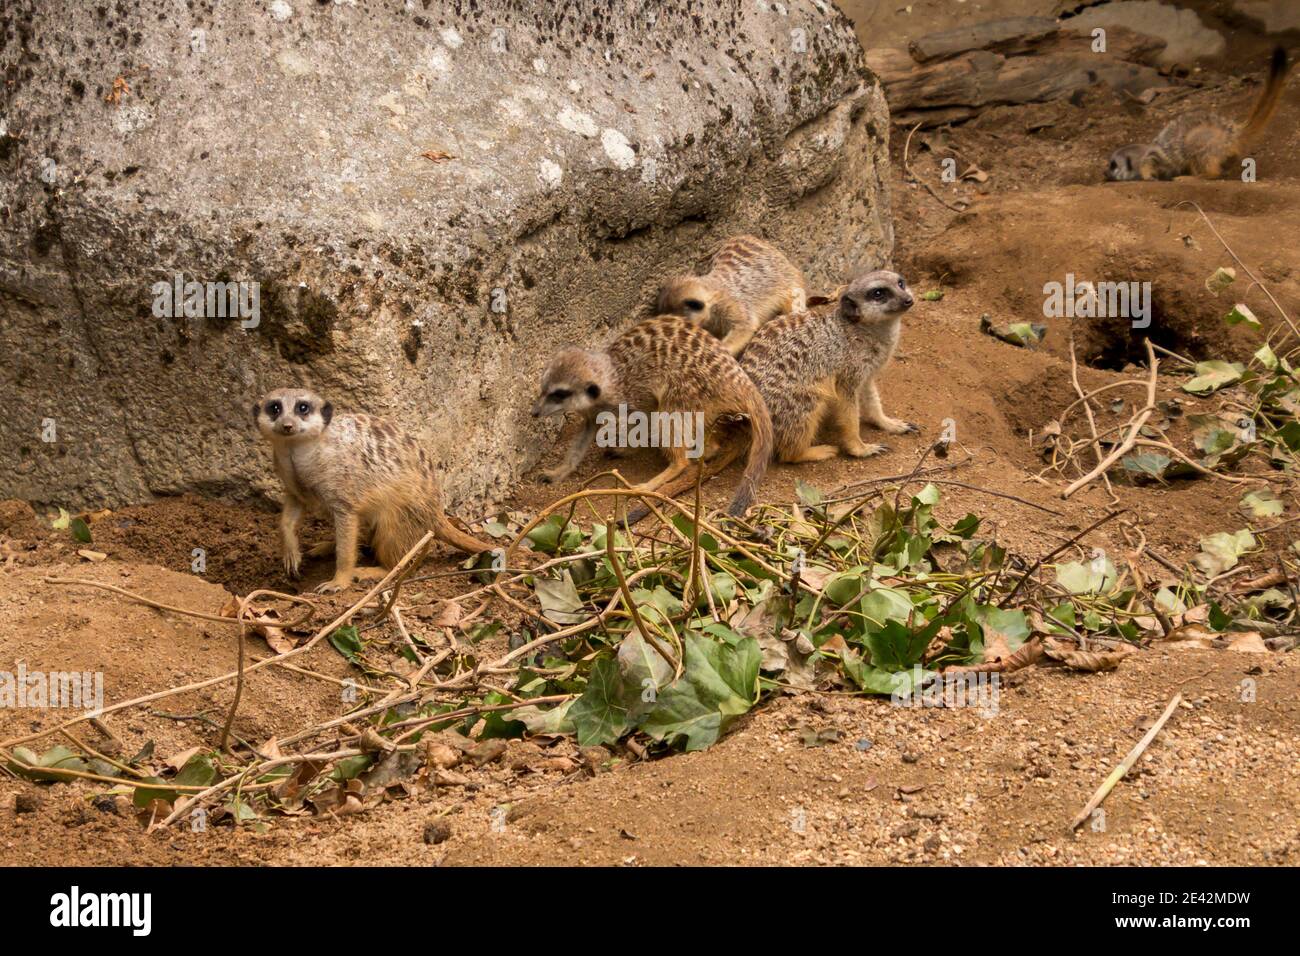 Funny image from African nature. Cute Meerkats, Suricata suricatta, sitting in the sand desert. Big family of small cute mammals. Stock Photo